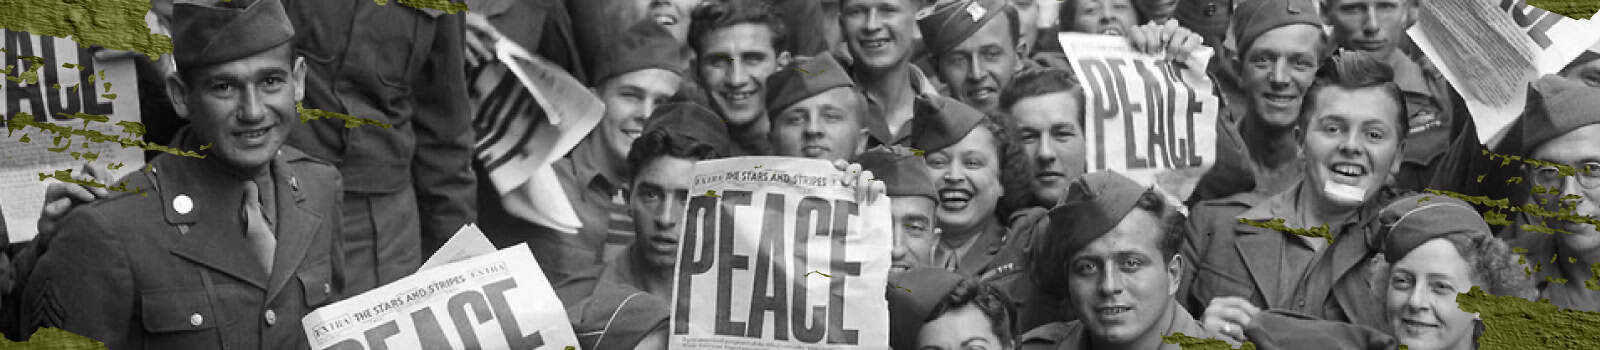 soldiers holding up signs that say "peace"